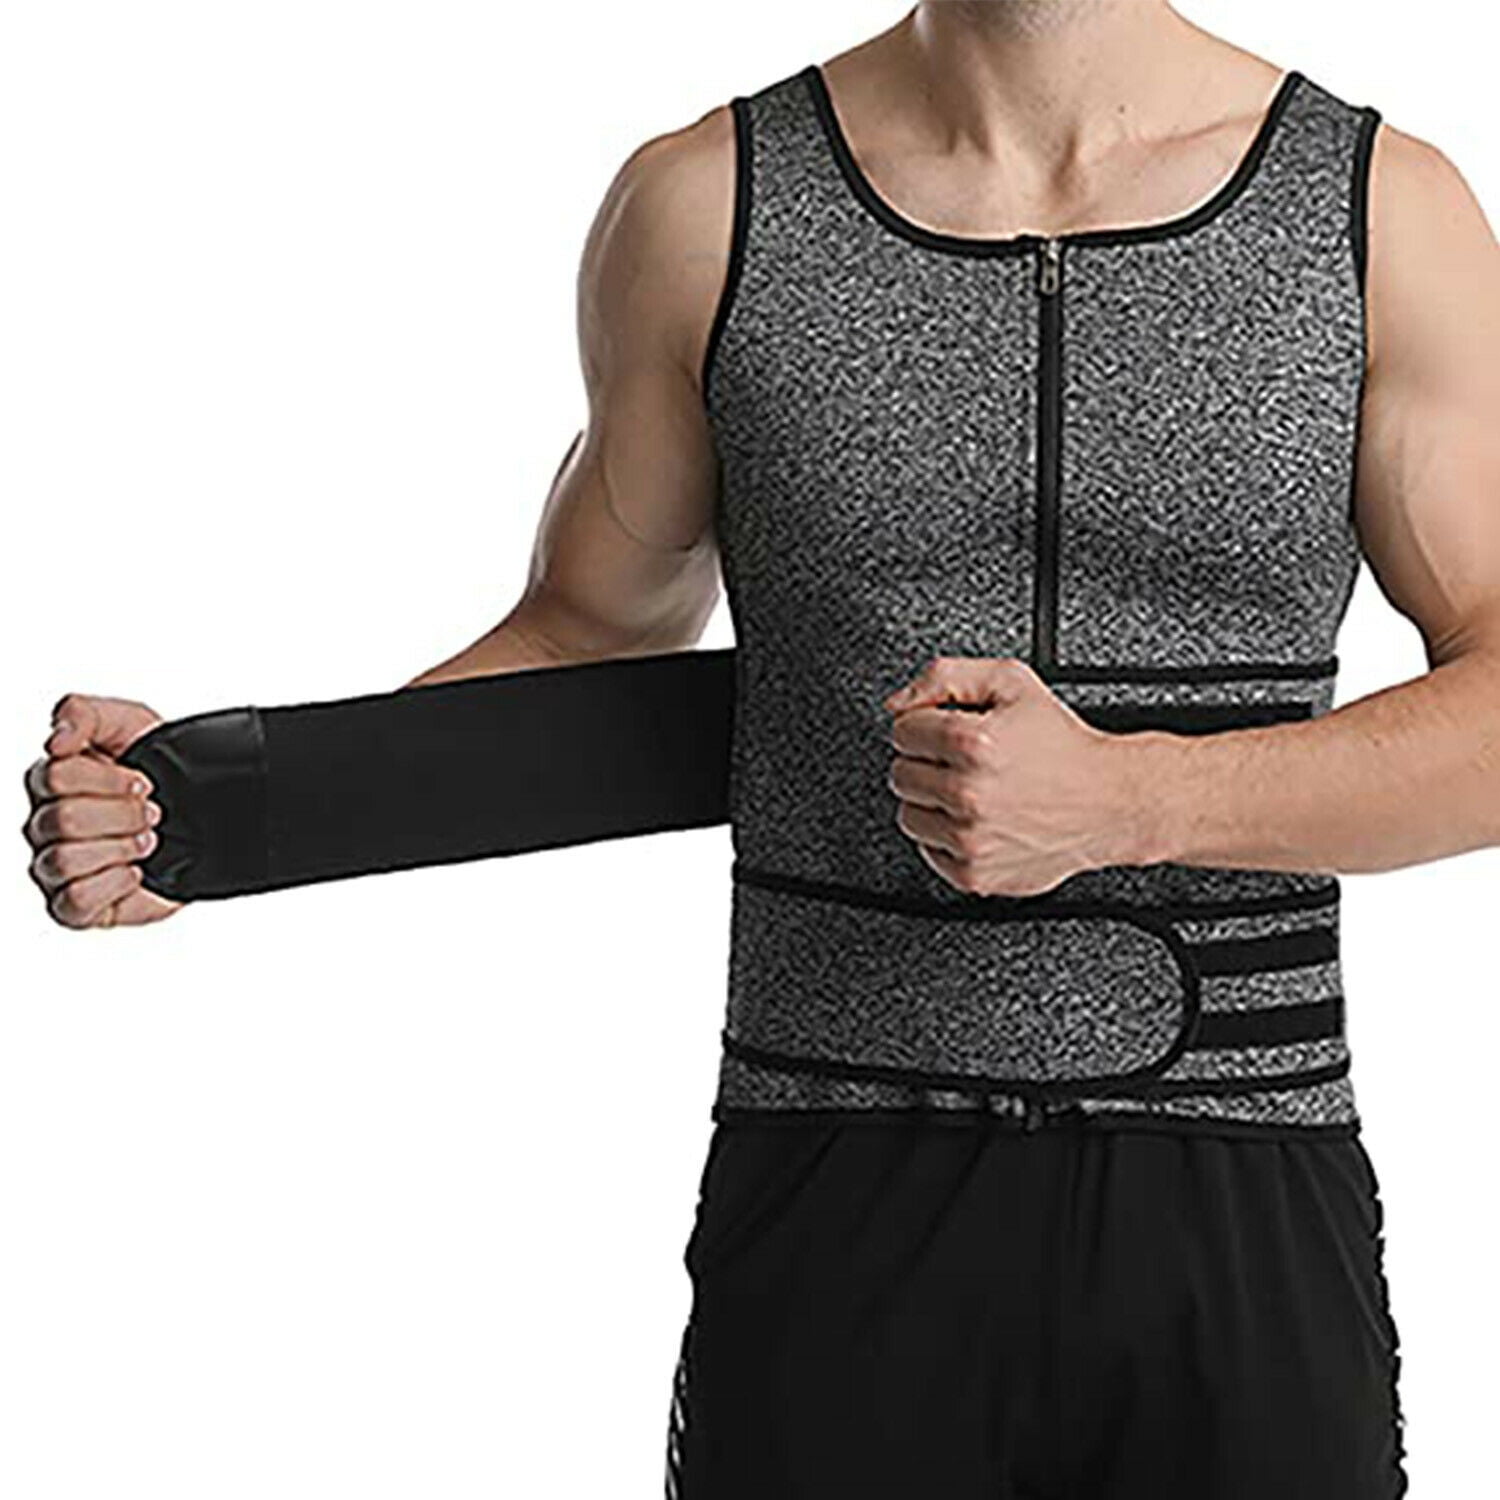 Made with Neoprene Excellent for Running or Fitness Workout Helps Sculpt Your abs and Weight Loss FitBelly Gear Sauna Vest for Men Size Medium Body Shaper with with Zipper